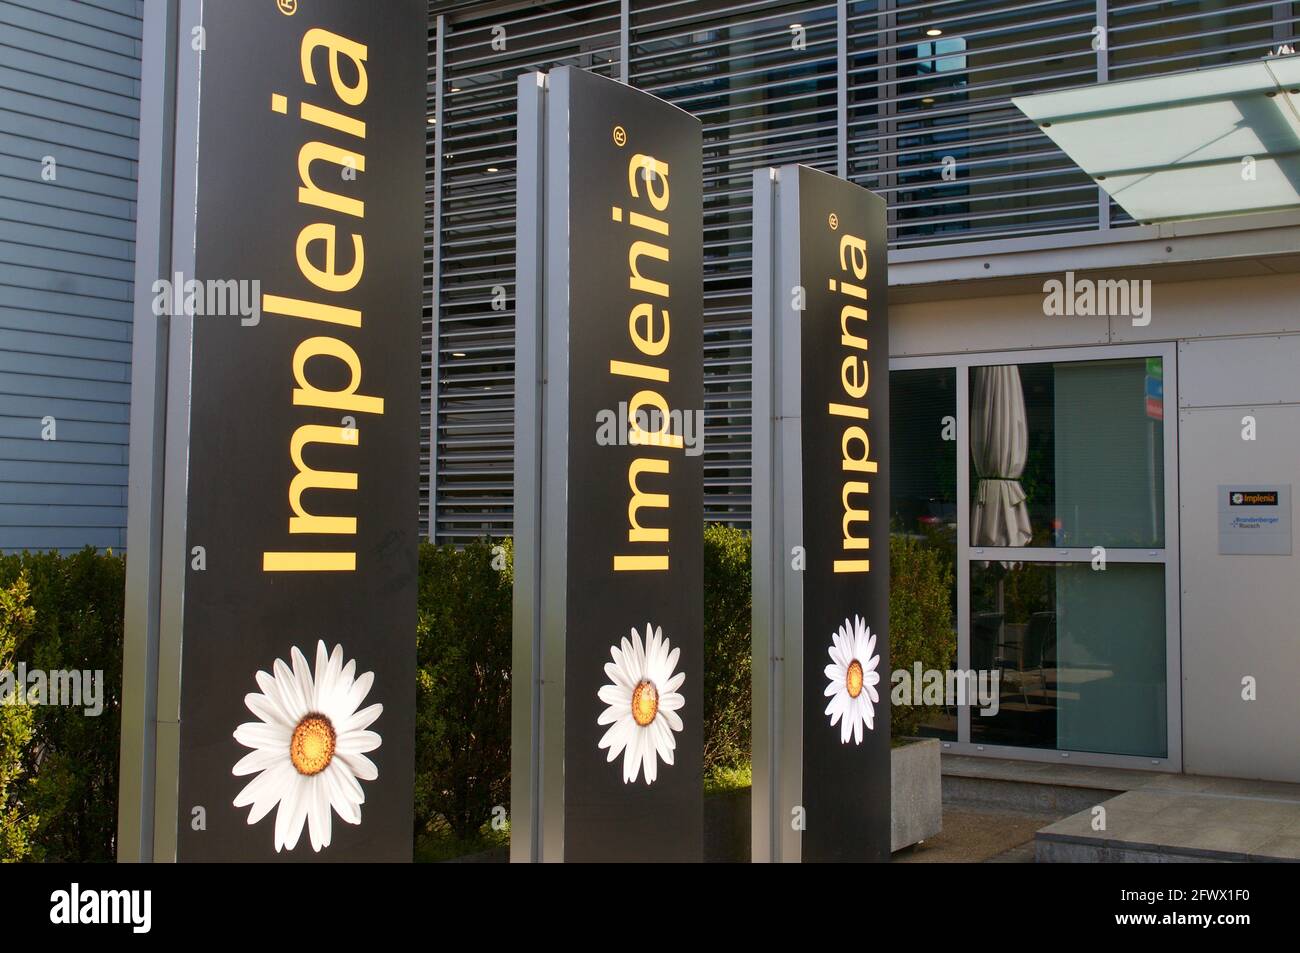 Dietlikon, Zurich, Switzerland - 16th April 2021 : Implenia company signs at the headquarters building in Dietlikon, Switzerland. Implenia is a Swiss Stock Photo